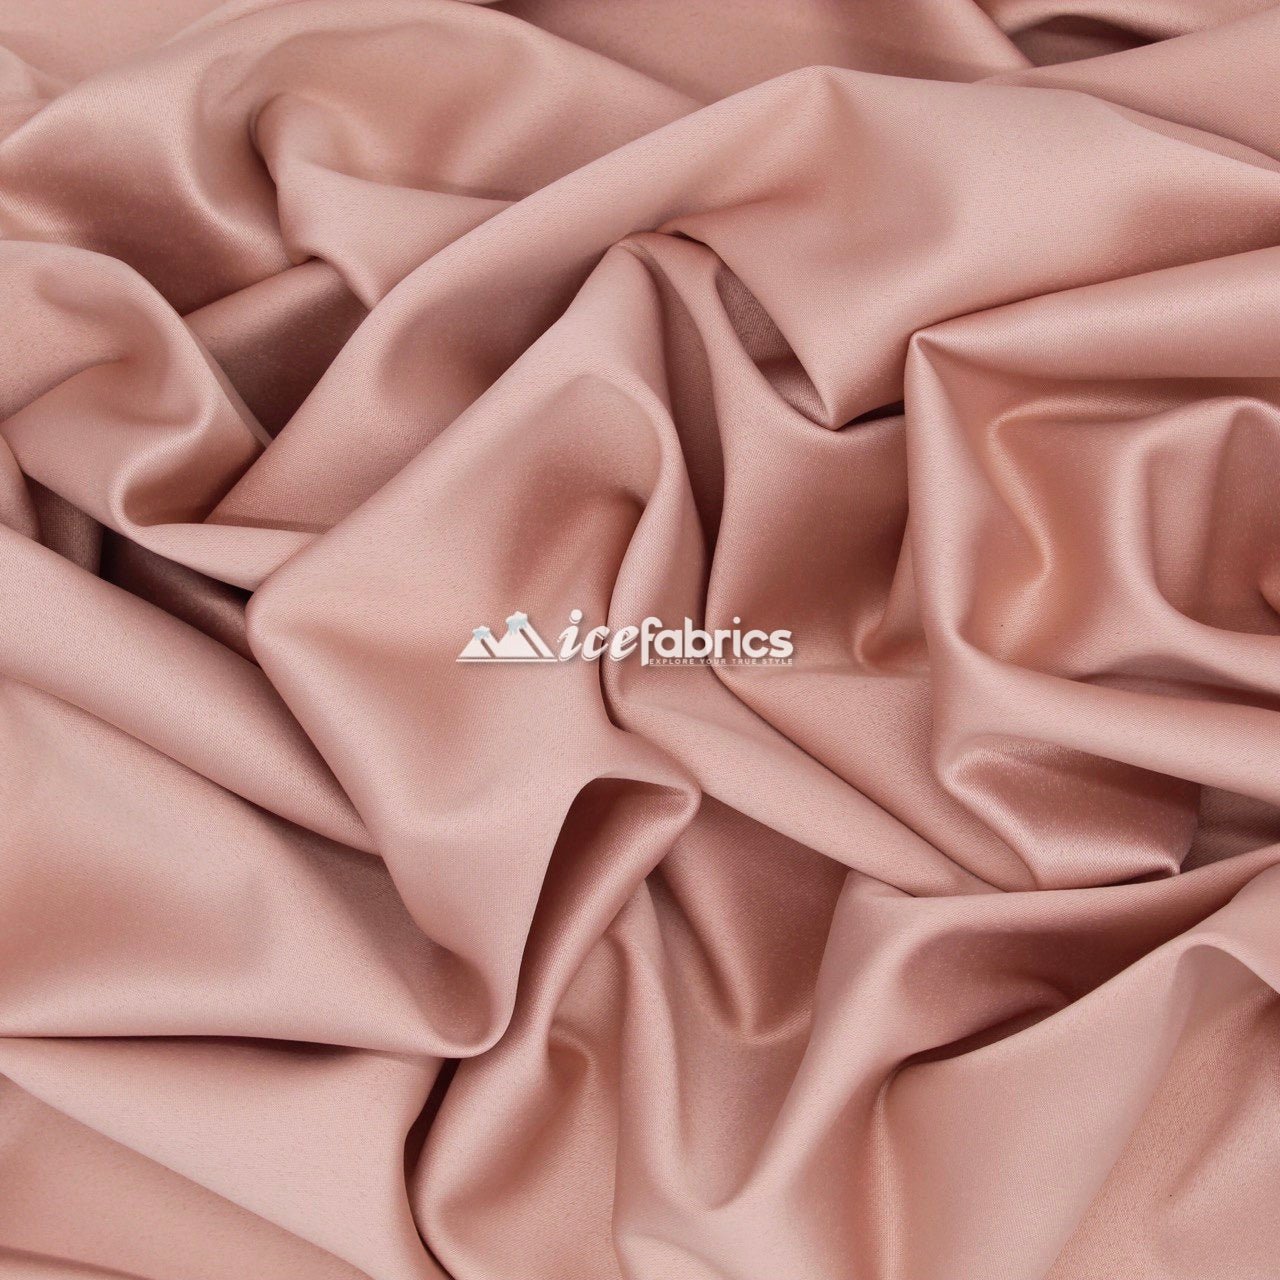 Armani Thick Solid Color Silky Stretch Satin Fabric Sold By The YardSatin FabricICE FABRICSICE FABRICSRose GoldArmani Thick Solid Color Silky Stretch Satin Fabric Sold By The Yard ICE FABRICS Rose Gold